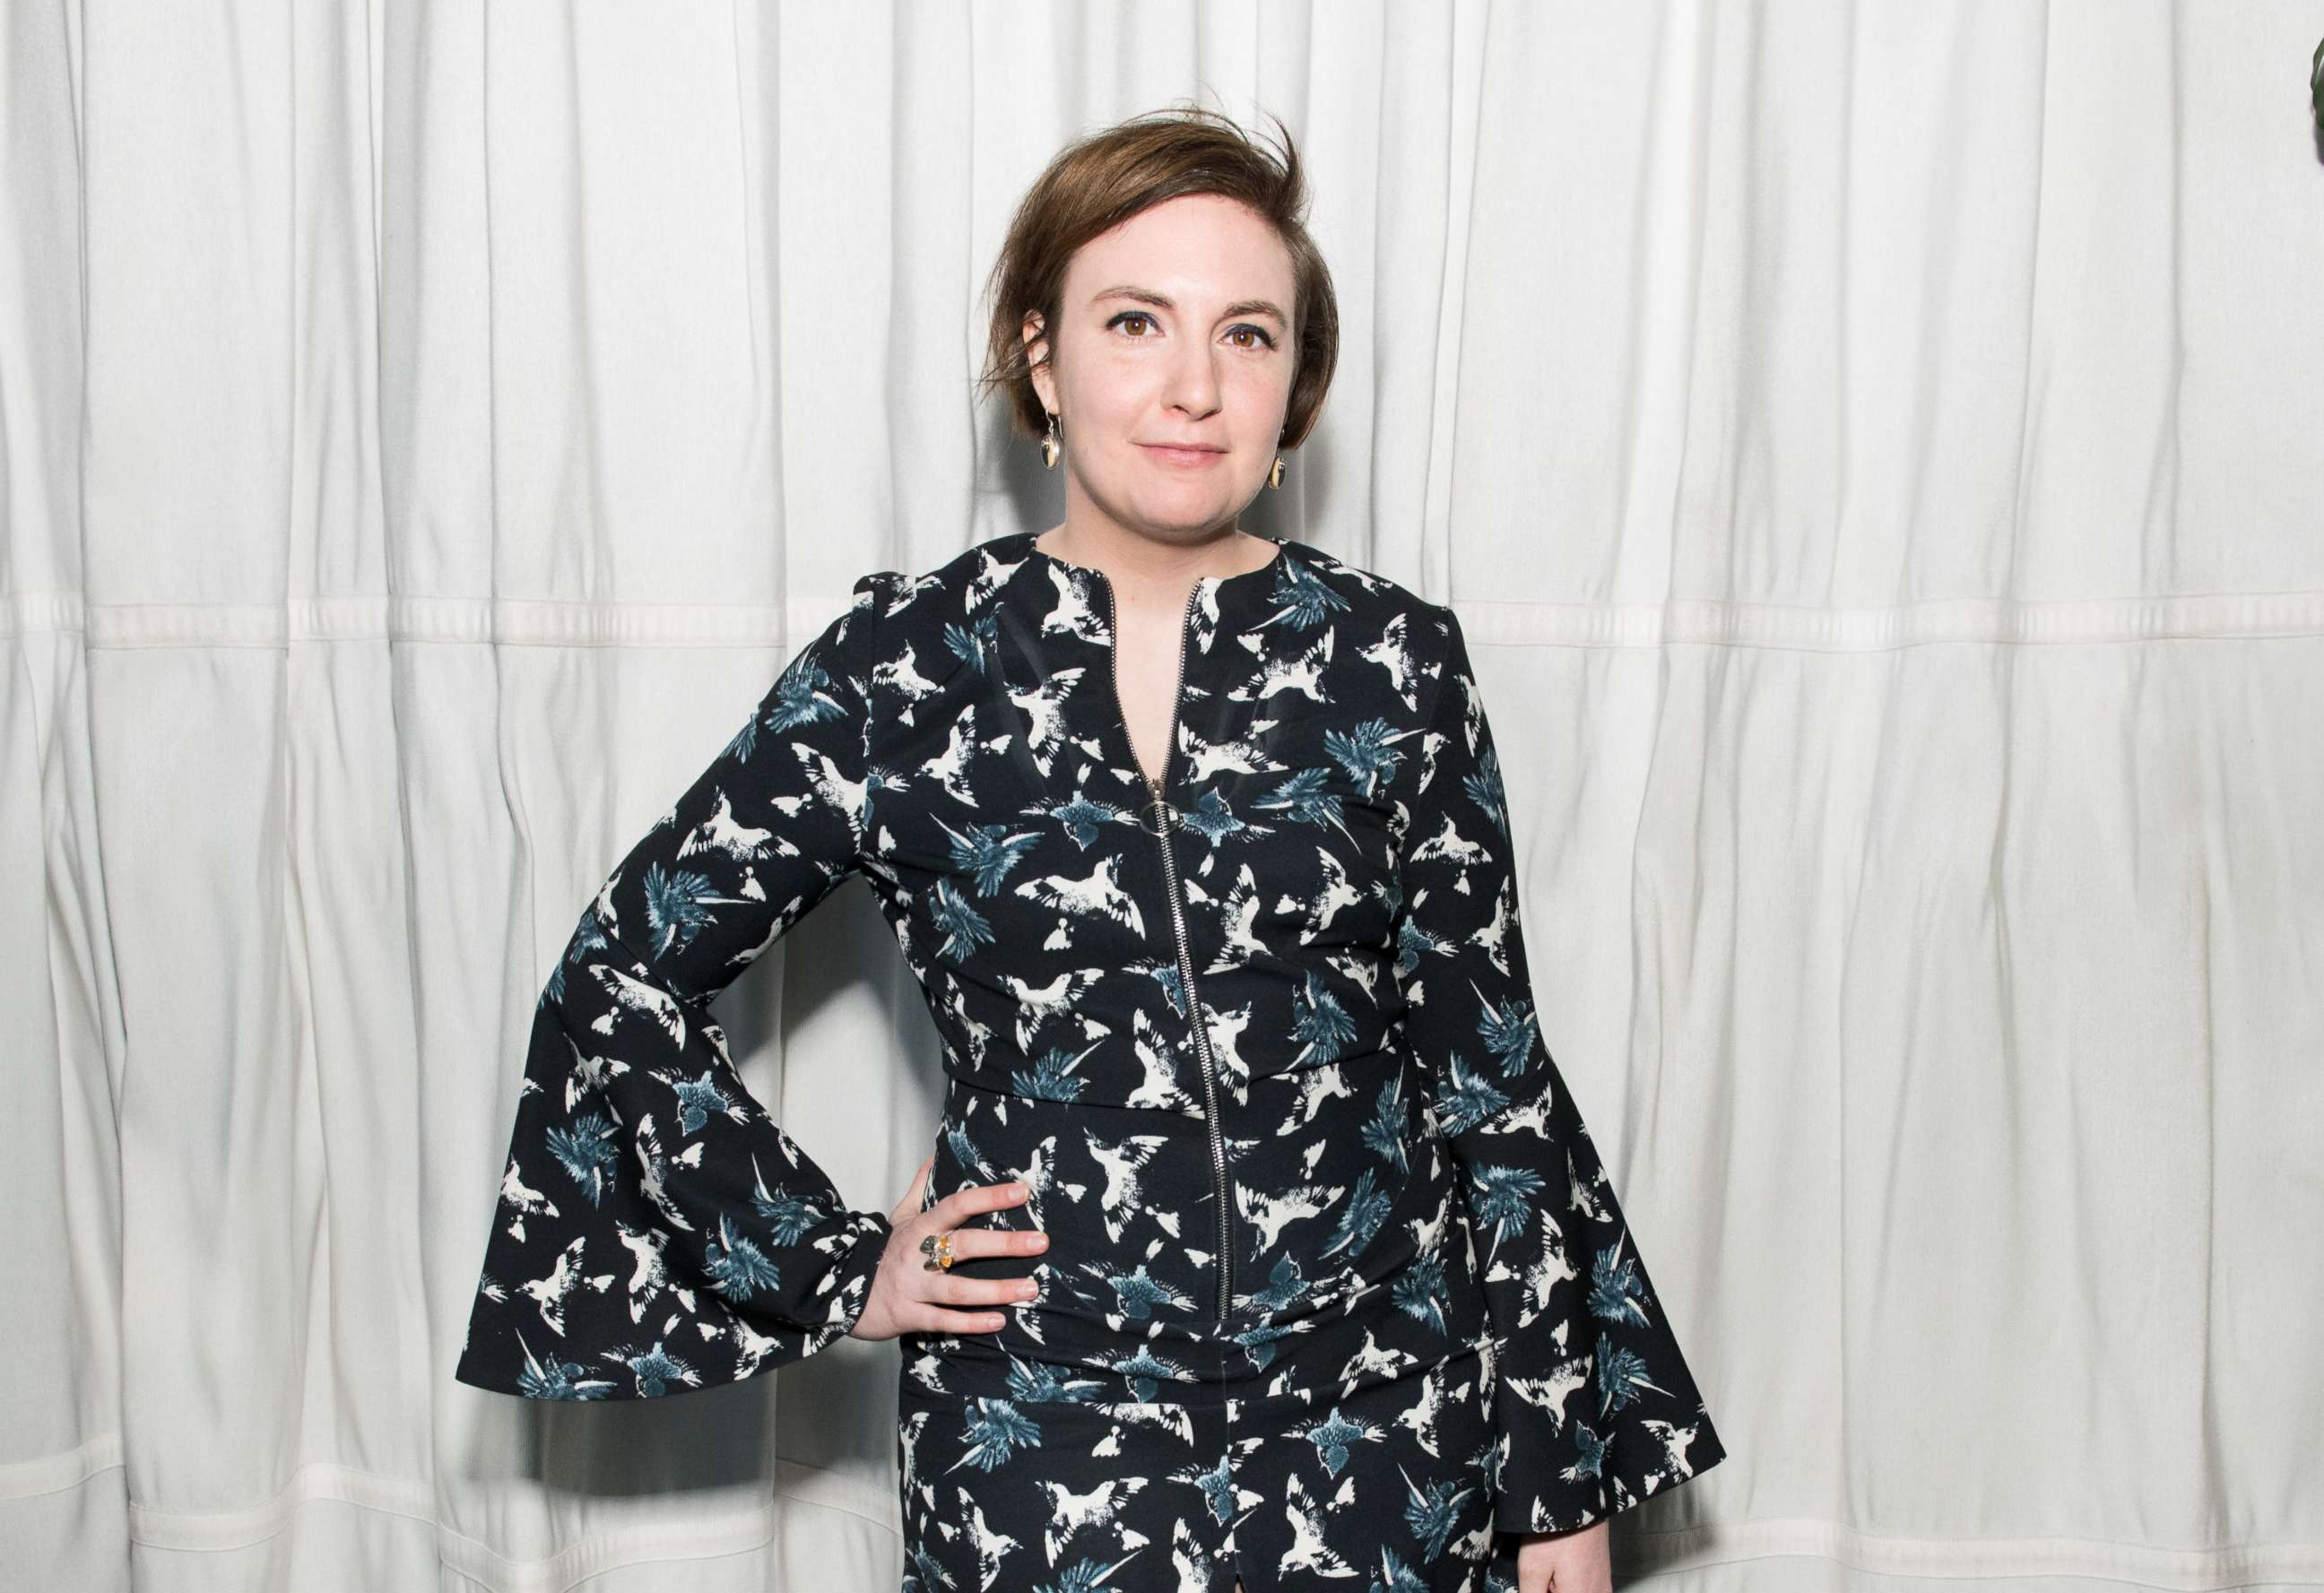 PHOTO: Lena Dunham attends the Brilliant Minds Initiative dinner at Gramercy Park Hotel Rooftop, May 1, 2018 in New York City.